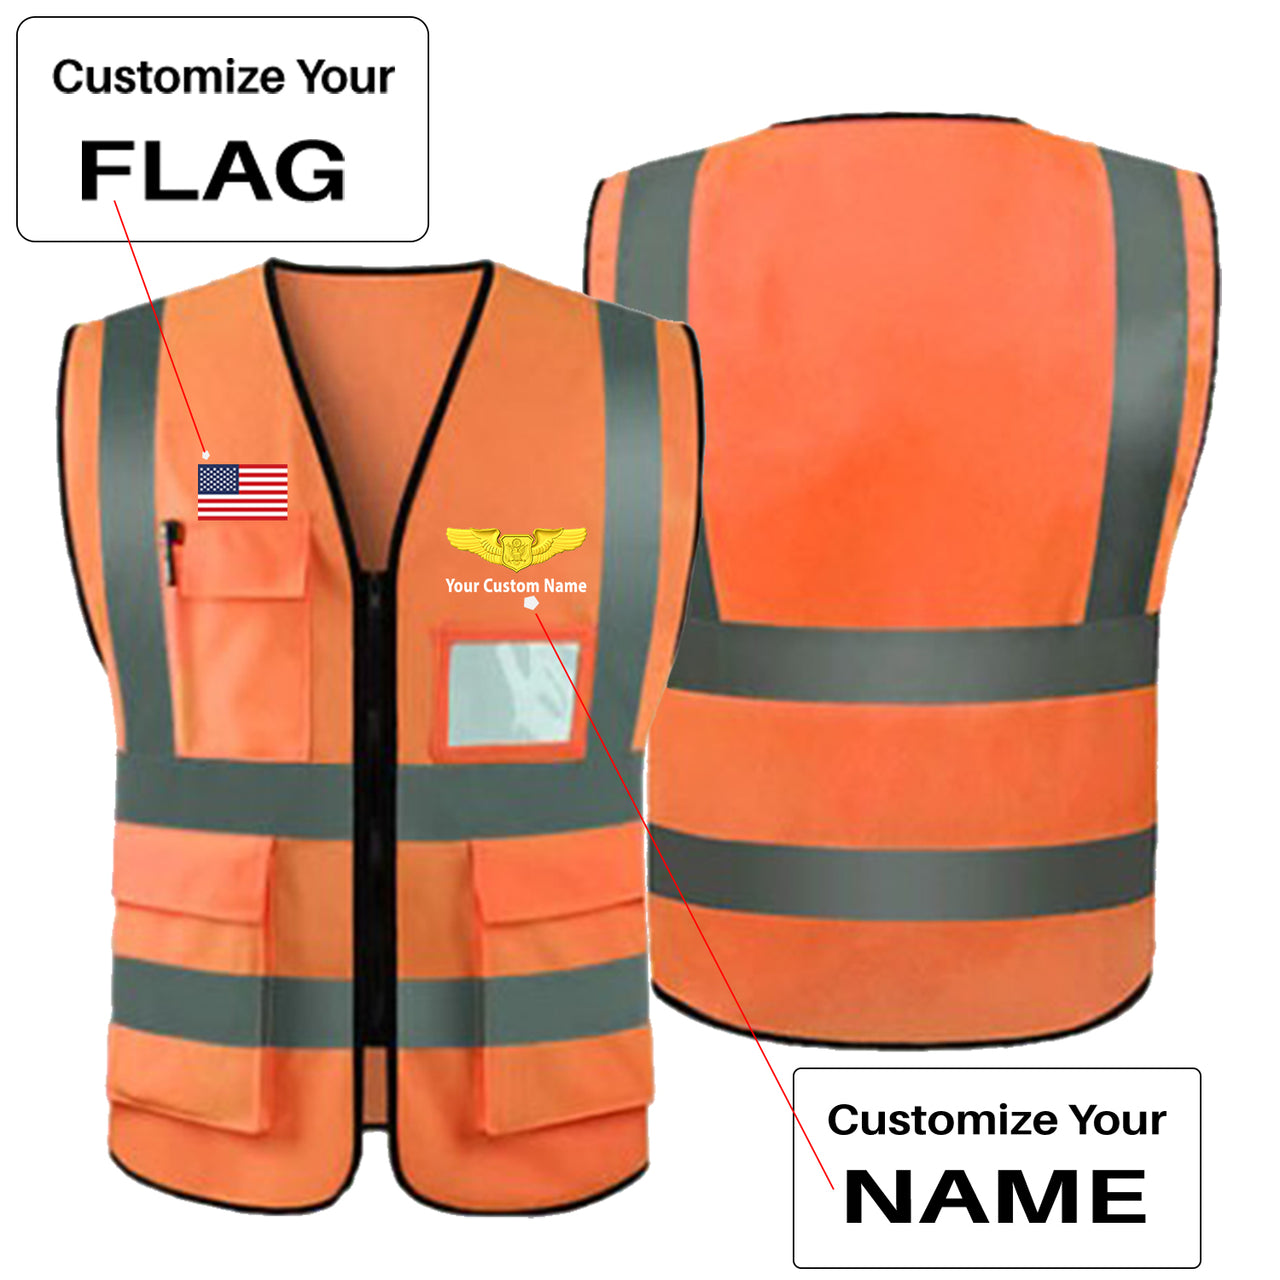 Custom Flag & Name with (Special US Air Force) Designed Reflective Vests